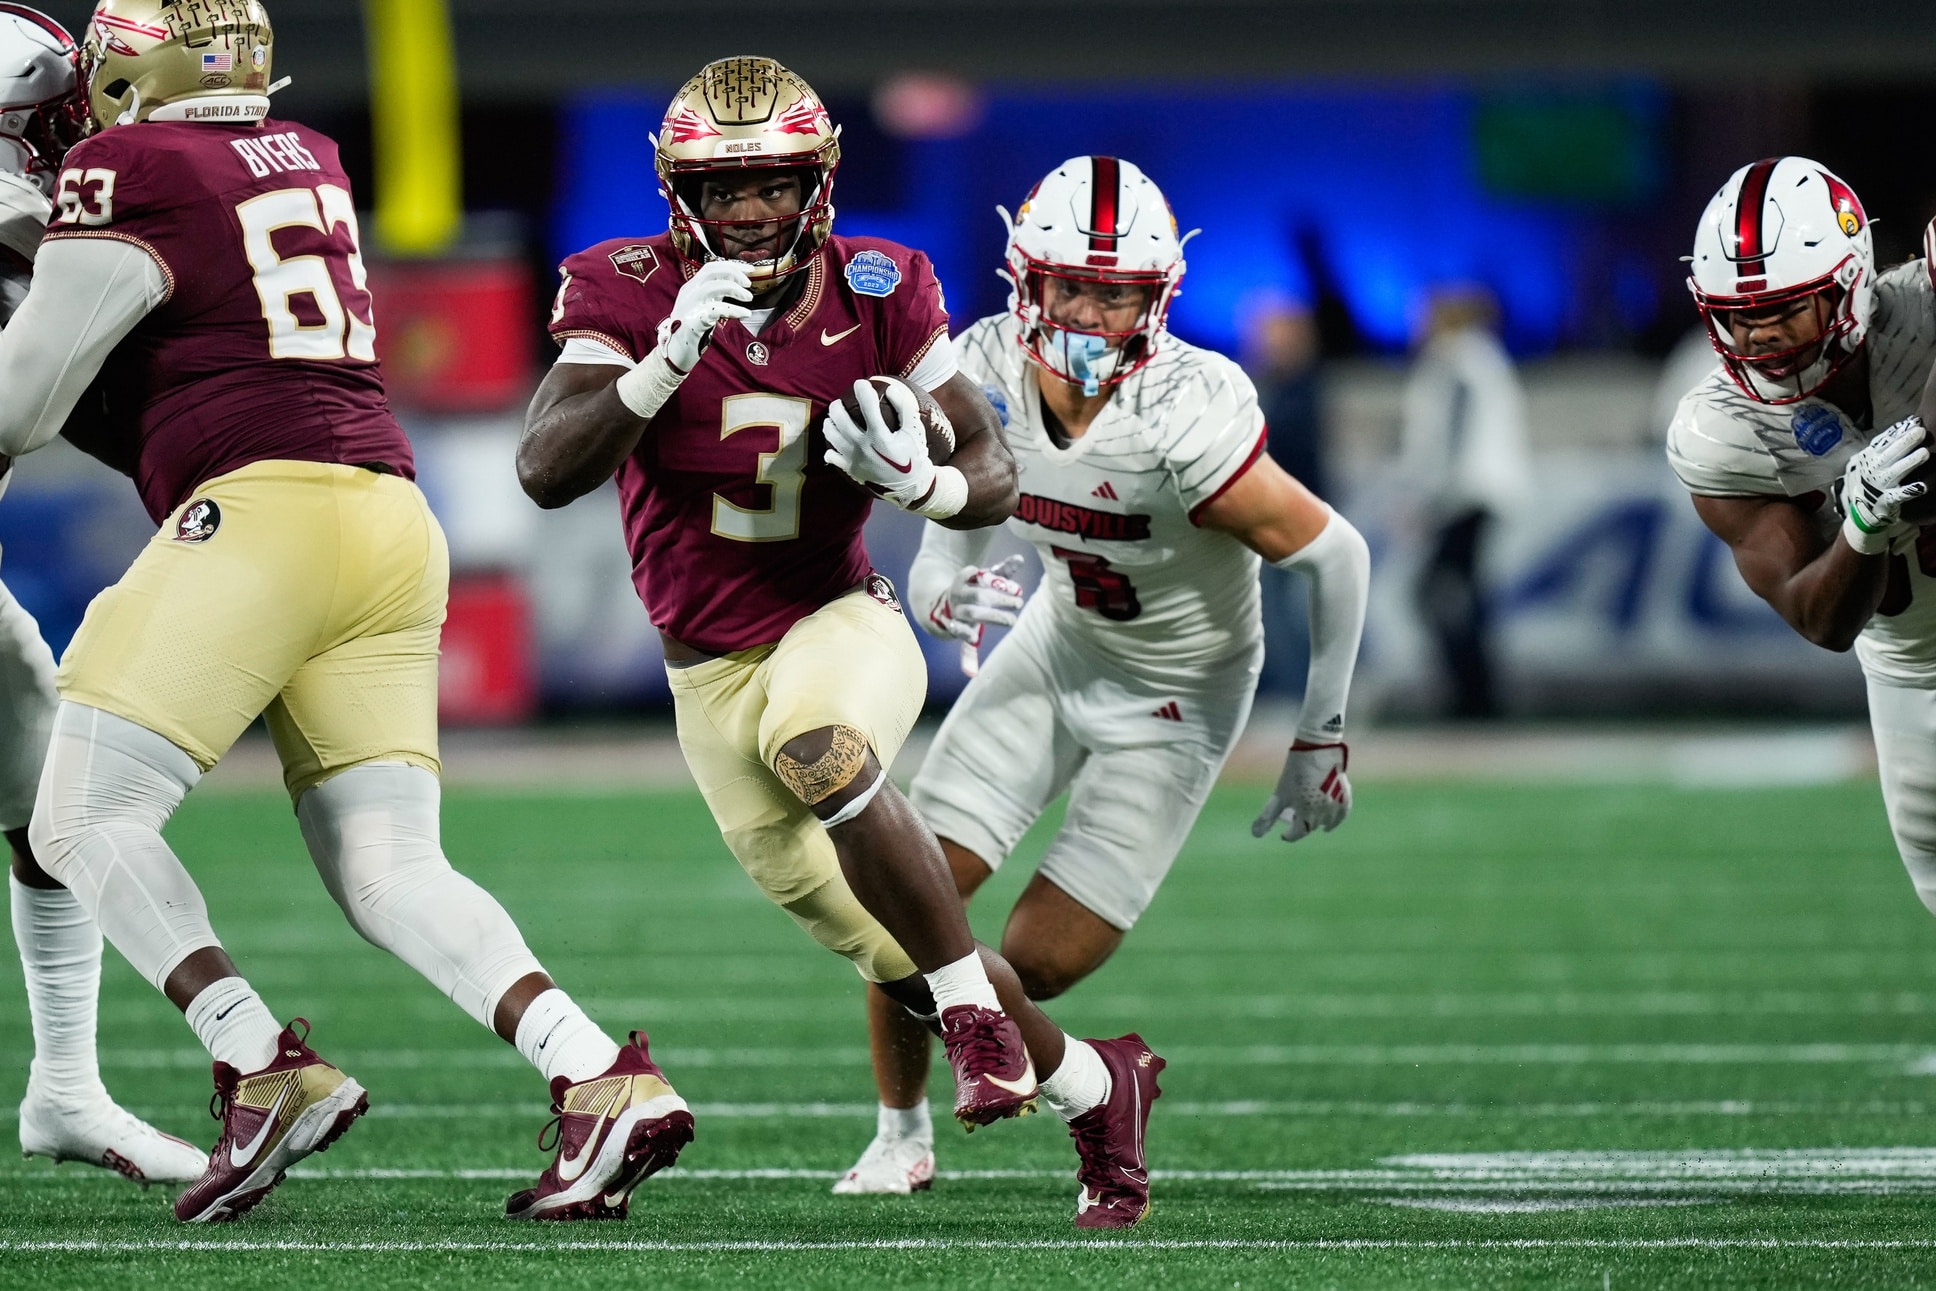 Florida State Seminoles running back Trey Benson (3) runs the ball against the Louisville Cardinals during the fourth quarter at Bank of America Stadium.